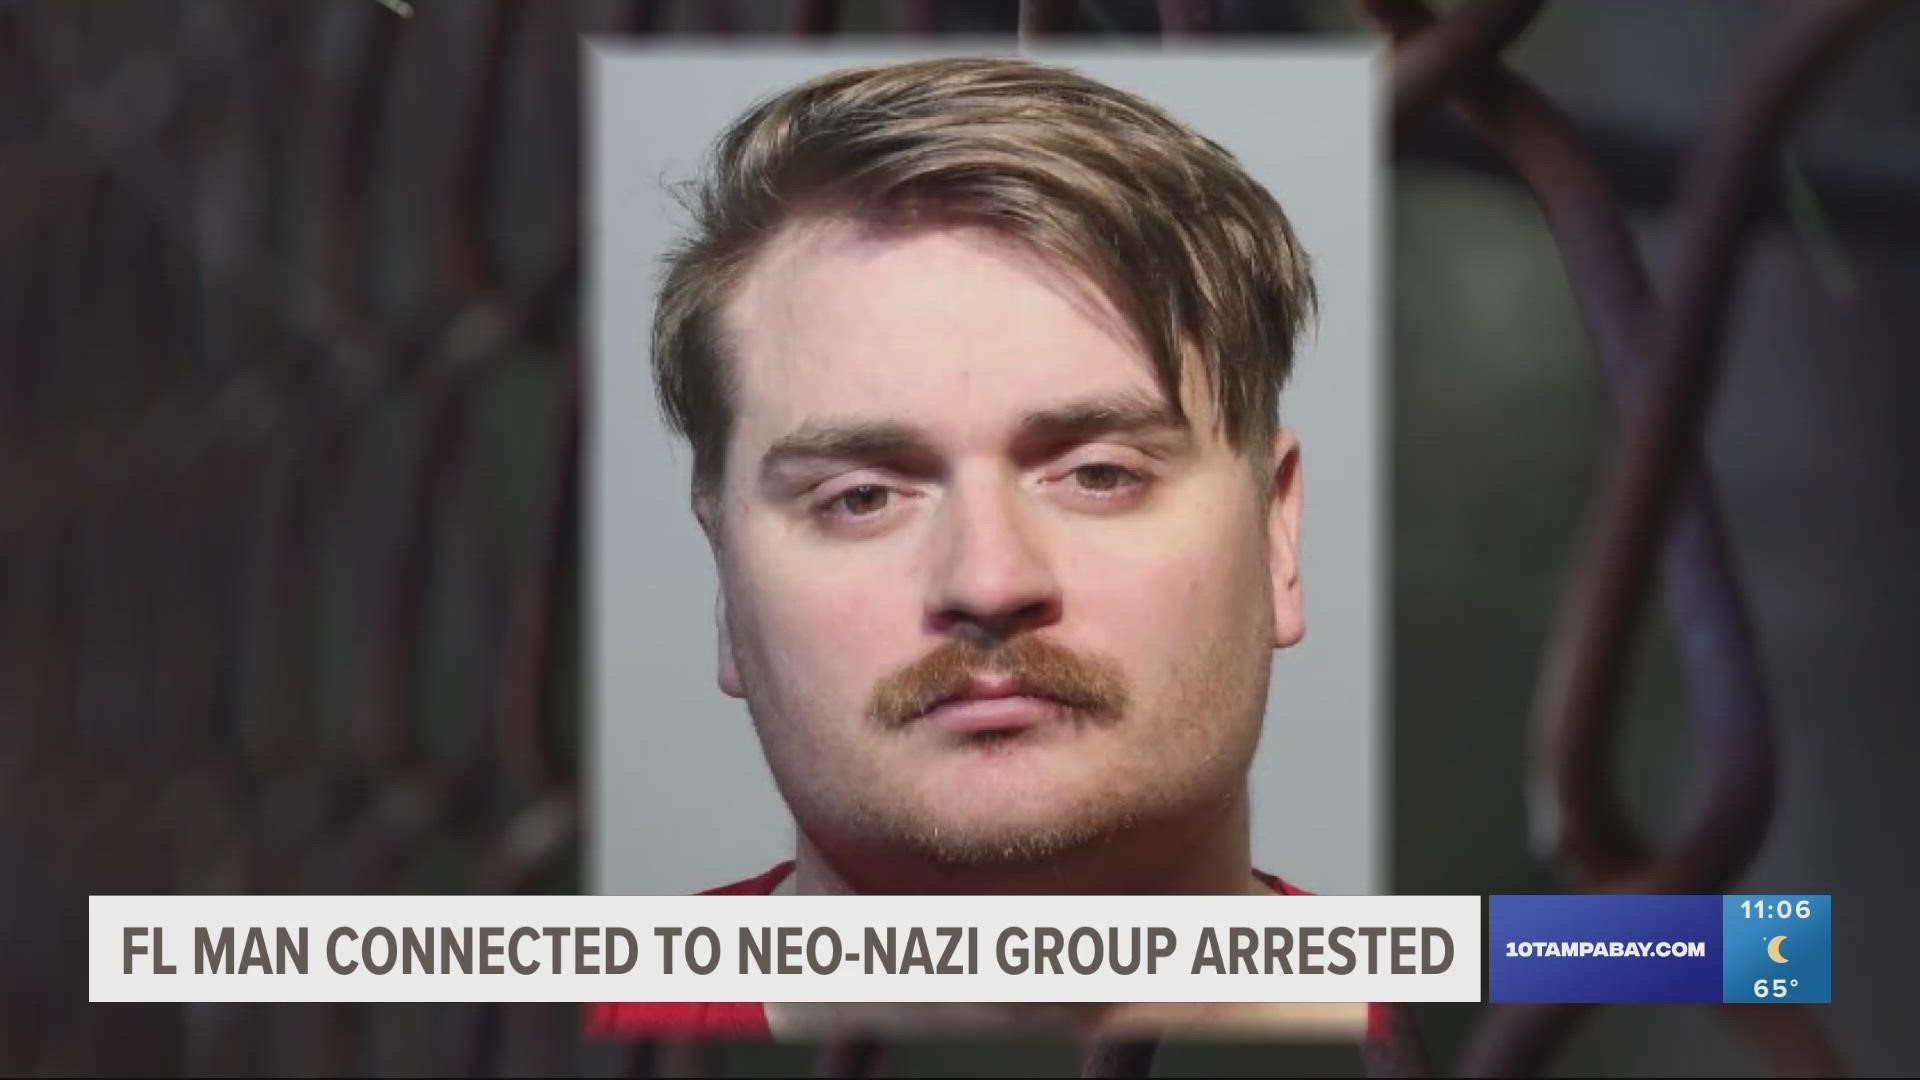 Sarah Beth Clendaniel and Florida neo-Nazi Brandon Russell conspired to attack the Baltimore-area power grid, according to U.S. officials.